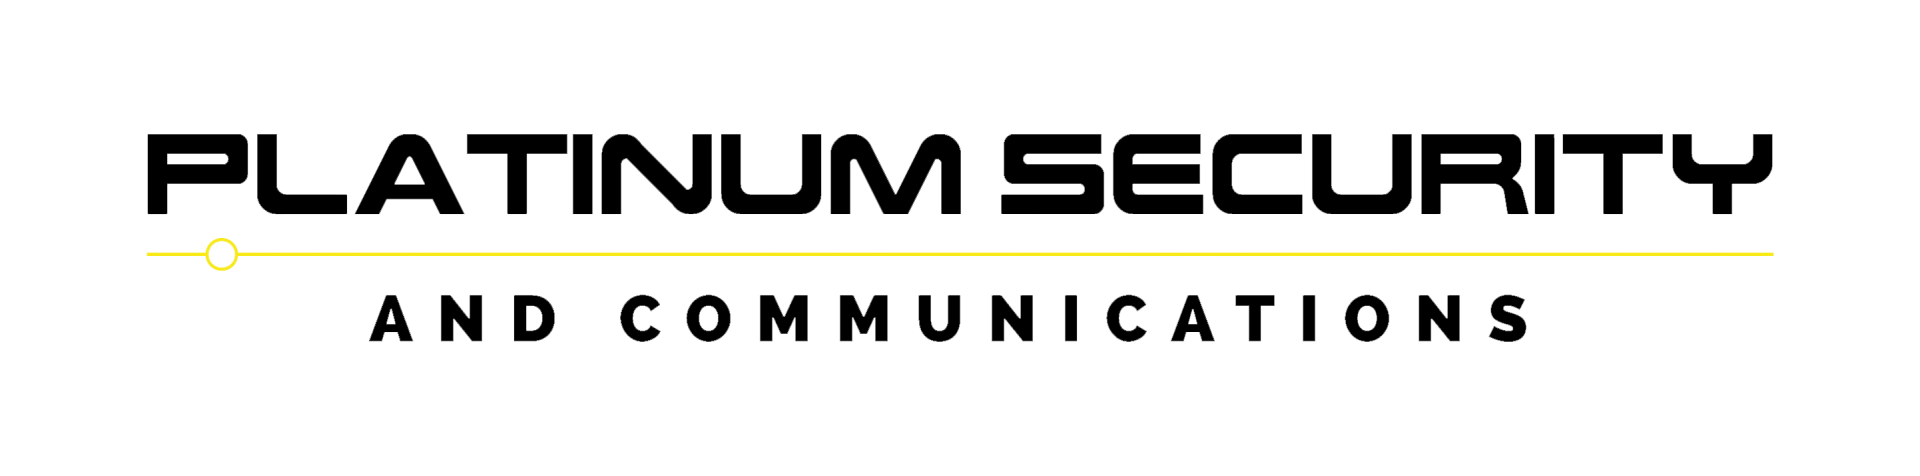 platinum security and communications icon